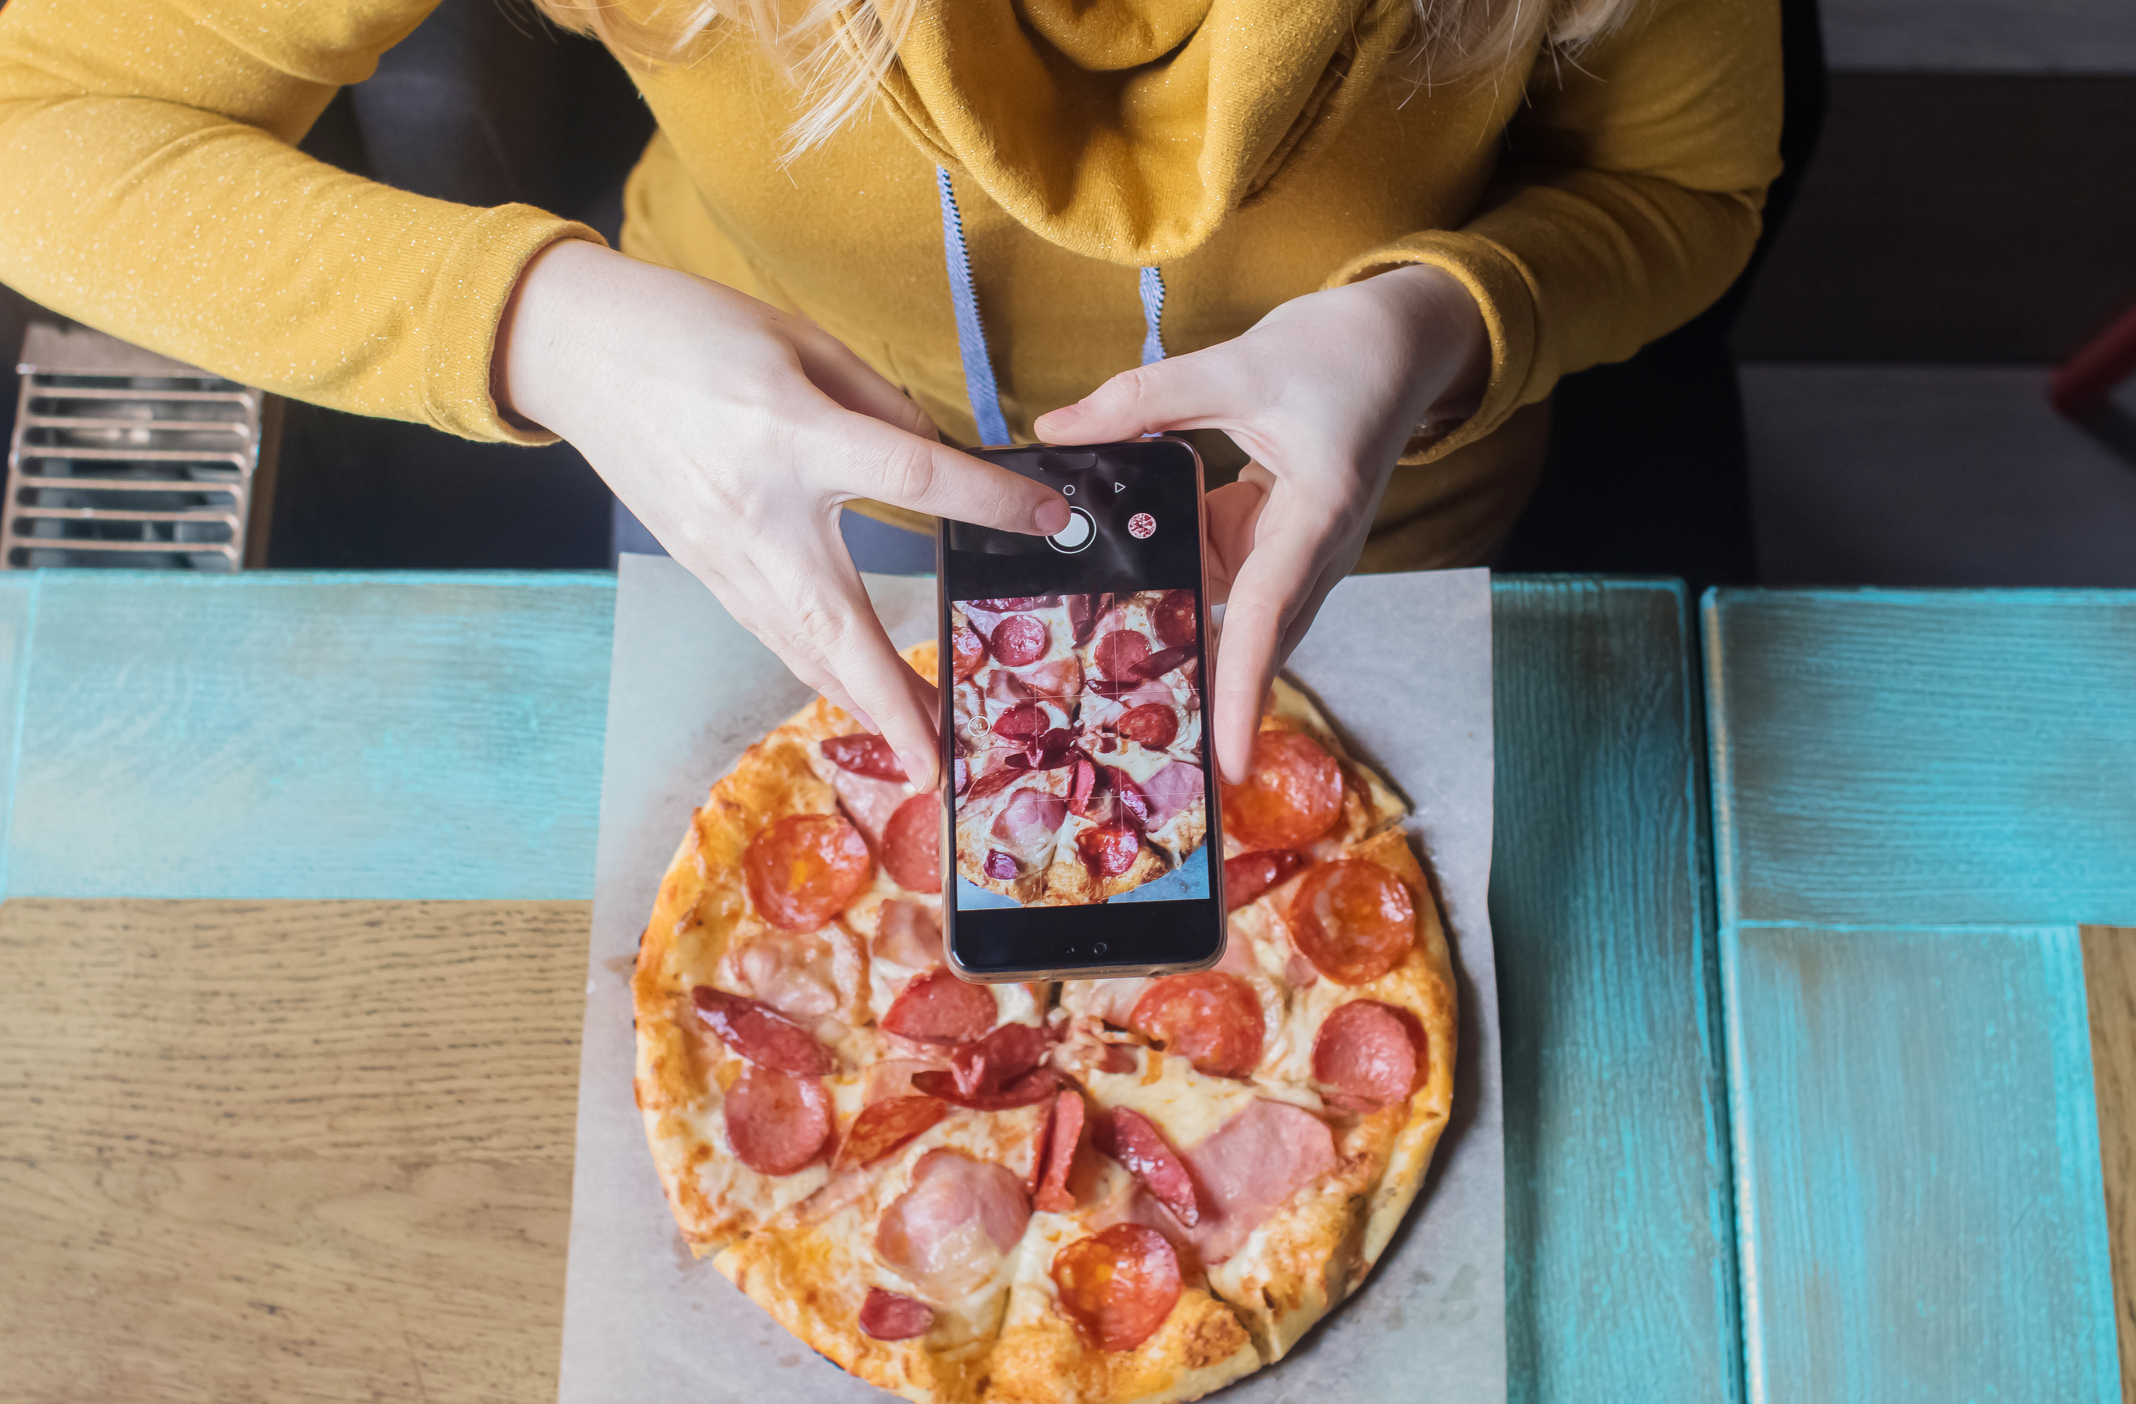 a blogger girl sits in a cafe and shoots a pizza on a smartphone. work in social networks, video blogs and photo blogs. concept for creating internet content and food photography.